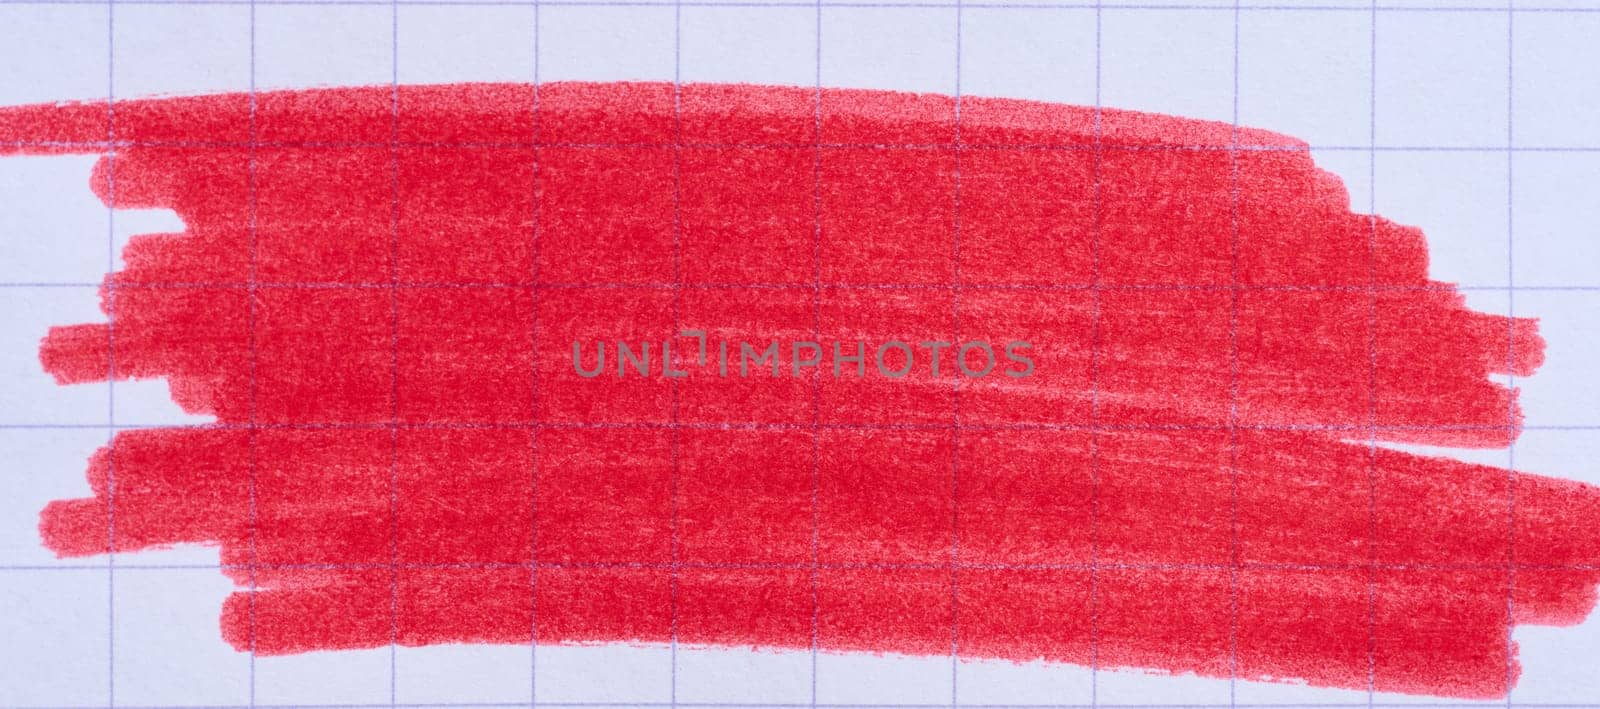 Hatching with a red felt-tip pen on a sheet of checkered paper by ndanko